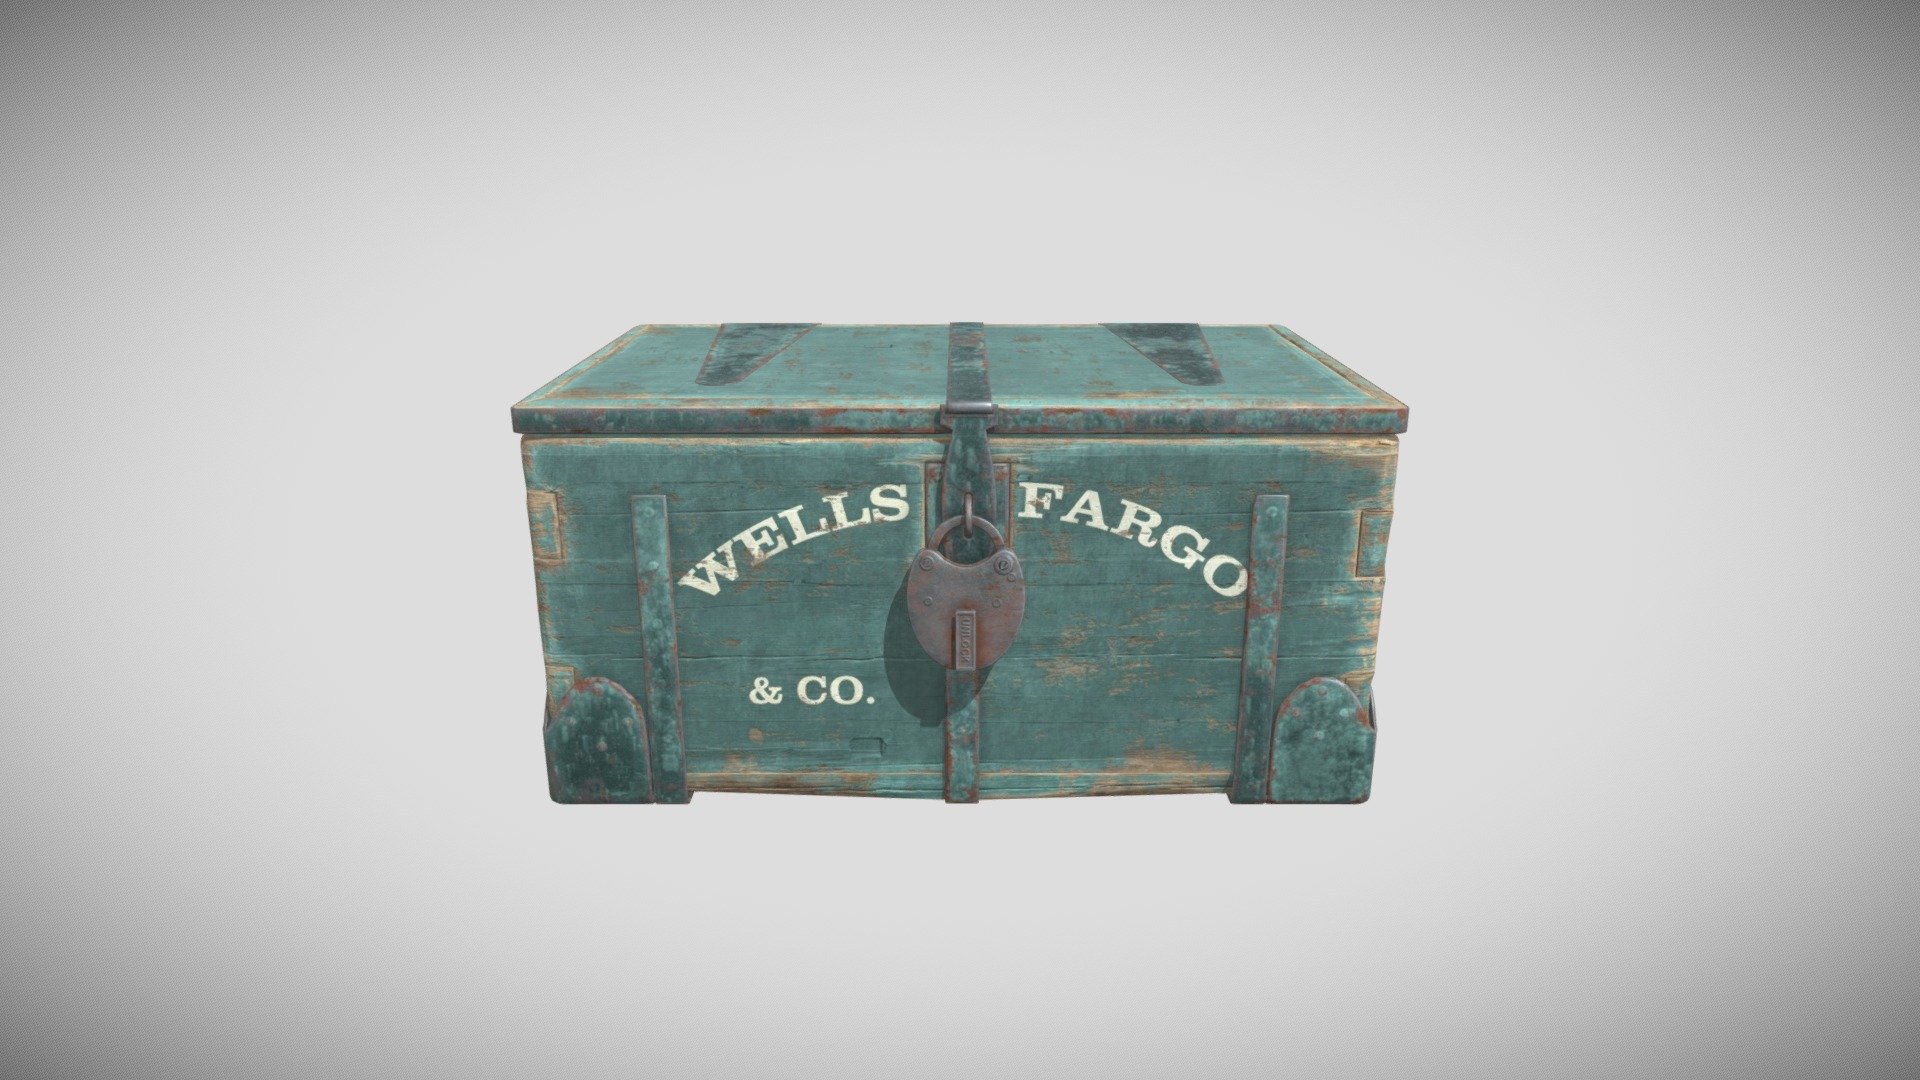 Wooden trunk modeled and sculpted in Blender, textured in Substance Painter. Models were made with game engine performance in mind, so a lot of geometry is optimised for lower poly count. Mesh consists of quads and triangles.

For better texture quality, mesh has been divided into two UV maps, each with its own material assigned. Textures included: base_color, roughness, metallic, height, normal (OpenGL). All textures are in 2K format, so if you need a lower resolution you can scale them in any photo editing software with minimal quality loss. Materials are assigned, just load in the textures and you are ready to go.

Mesh is divided into three parts, box, lid, and lock. They are all parented to their own Empty parent for easier handling inside your scene 3d model